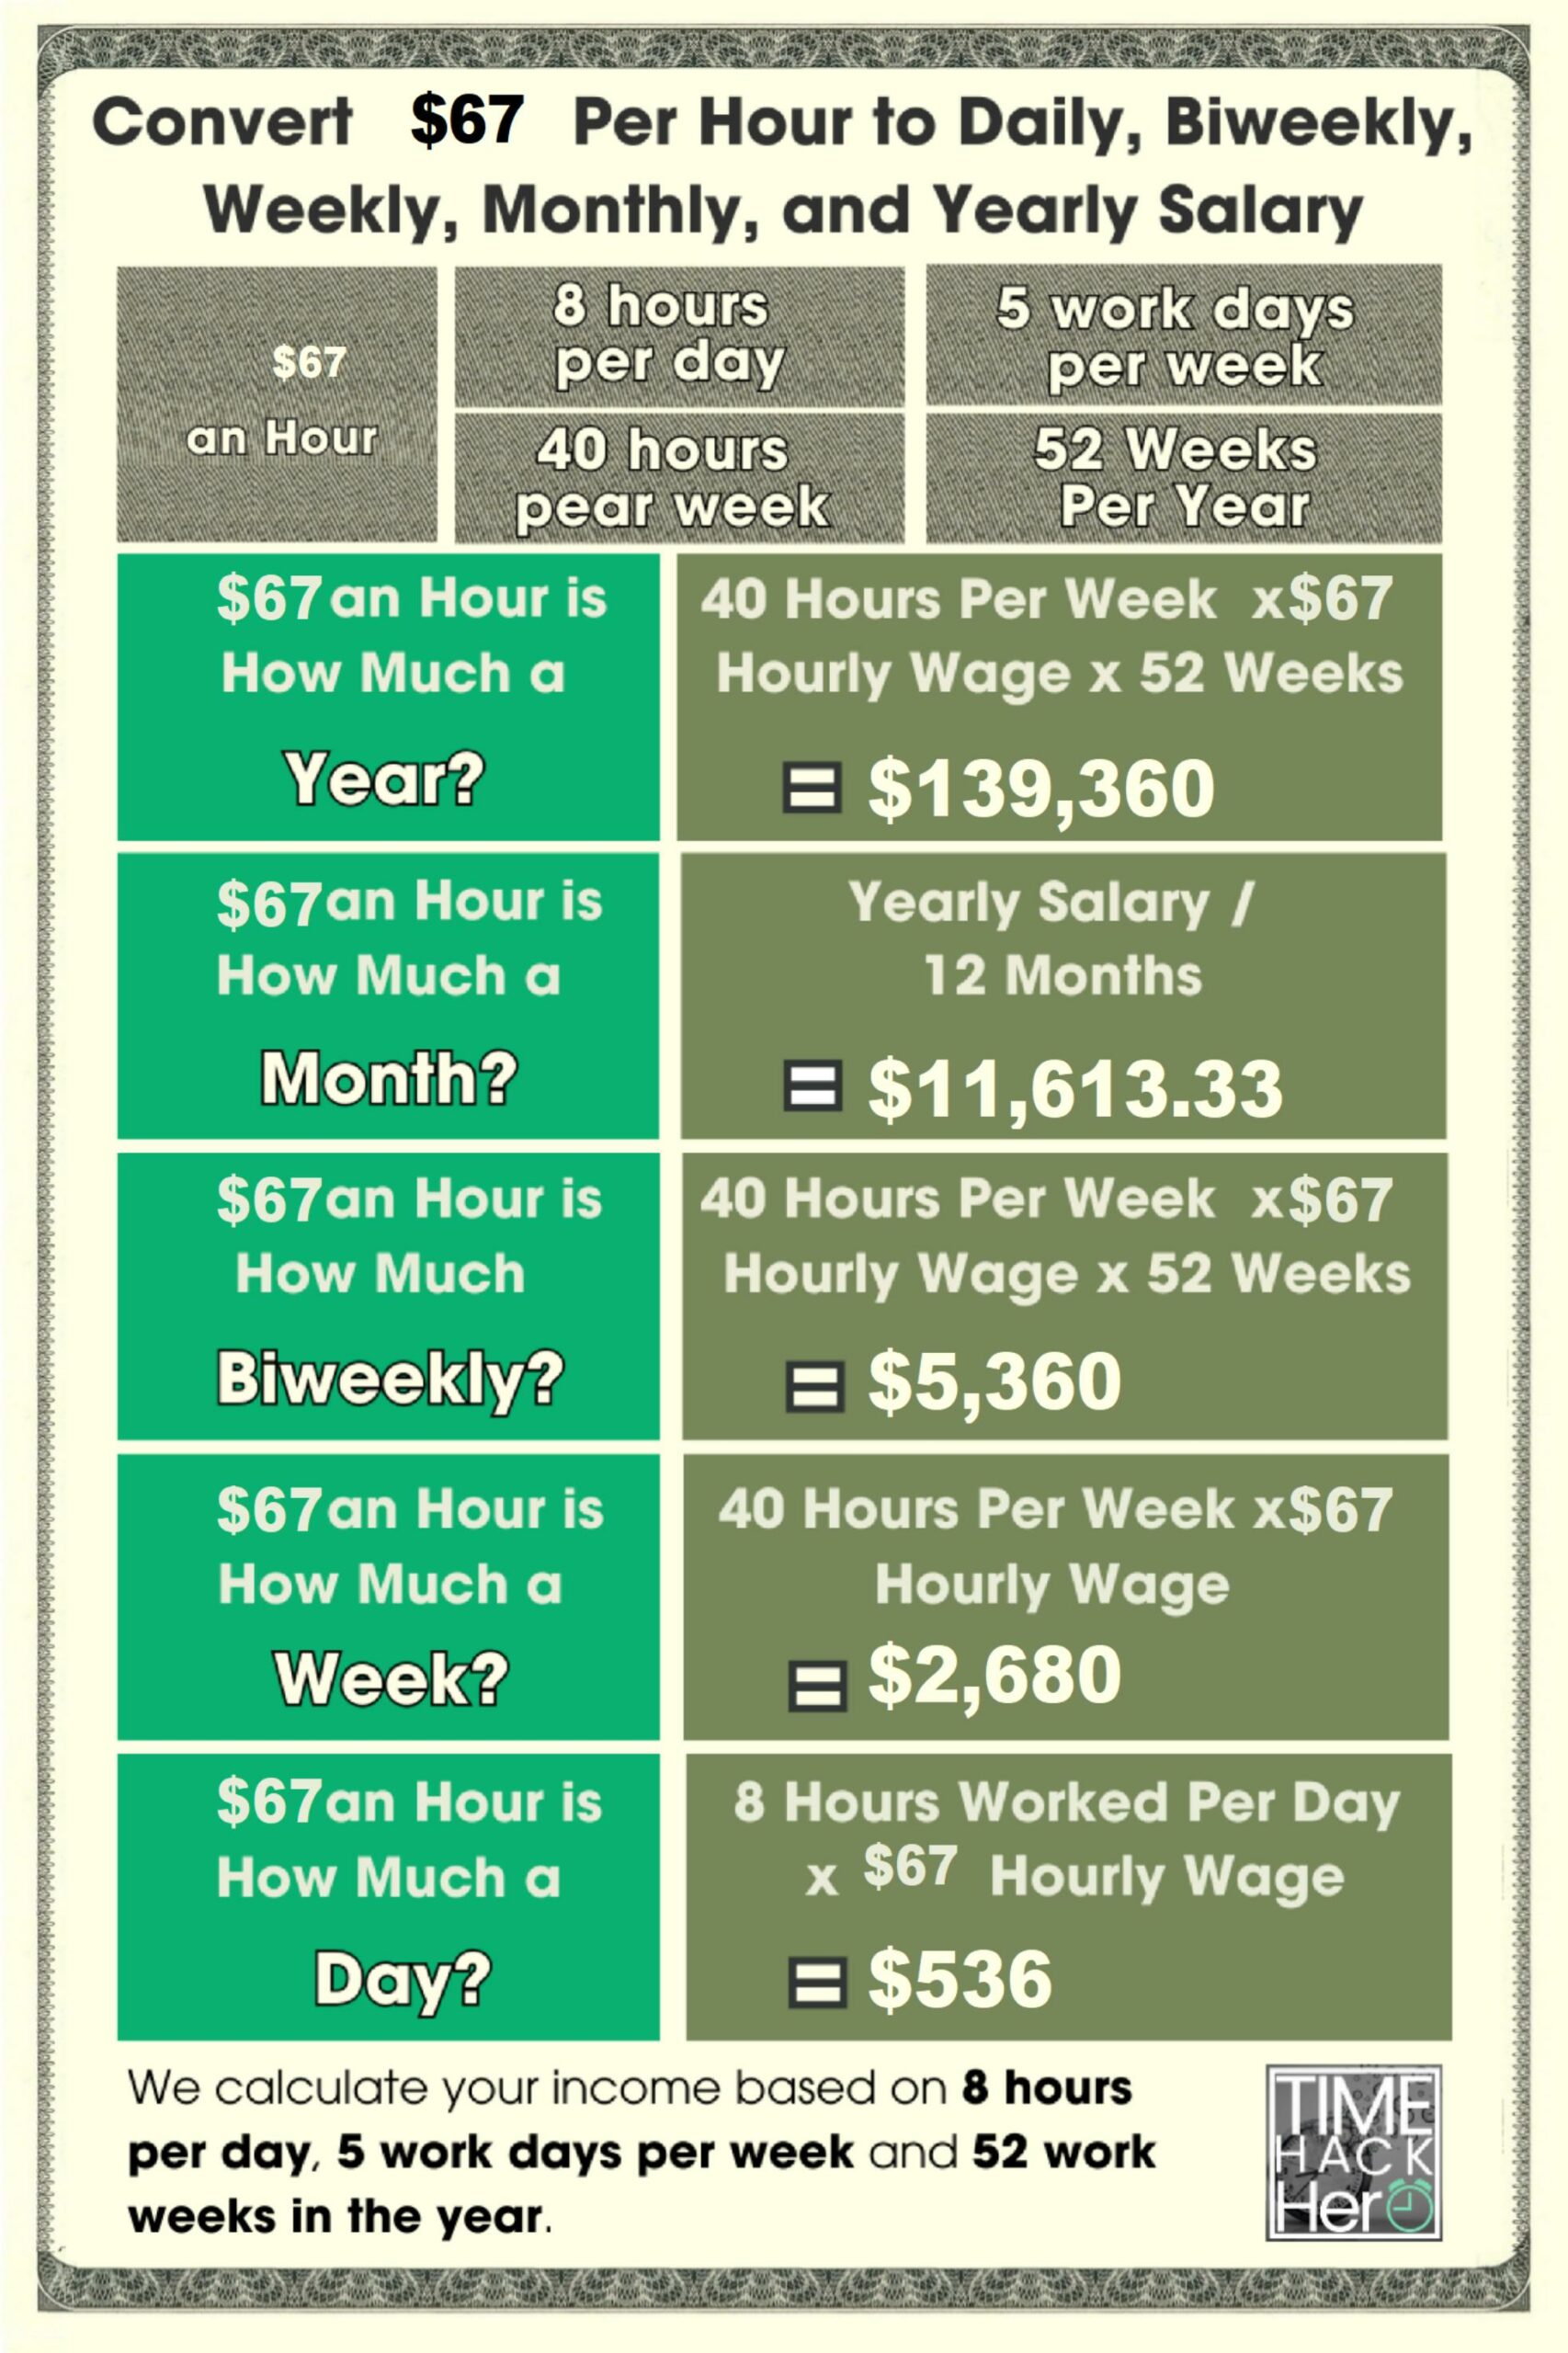 Convert $67 Per Hour to Weekly, Monthly, and Yearly Salary